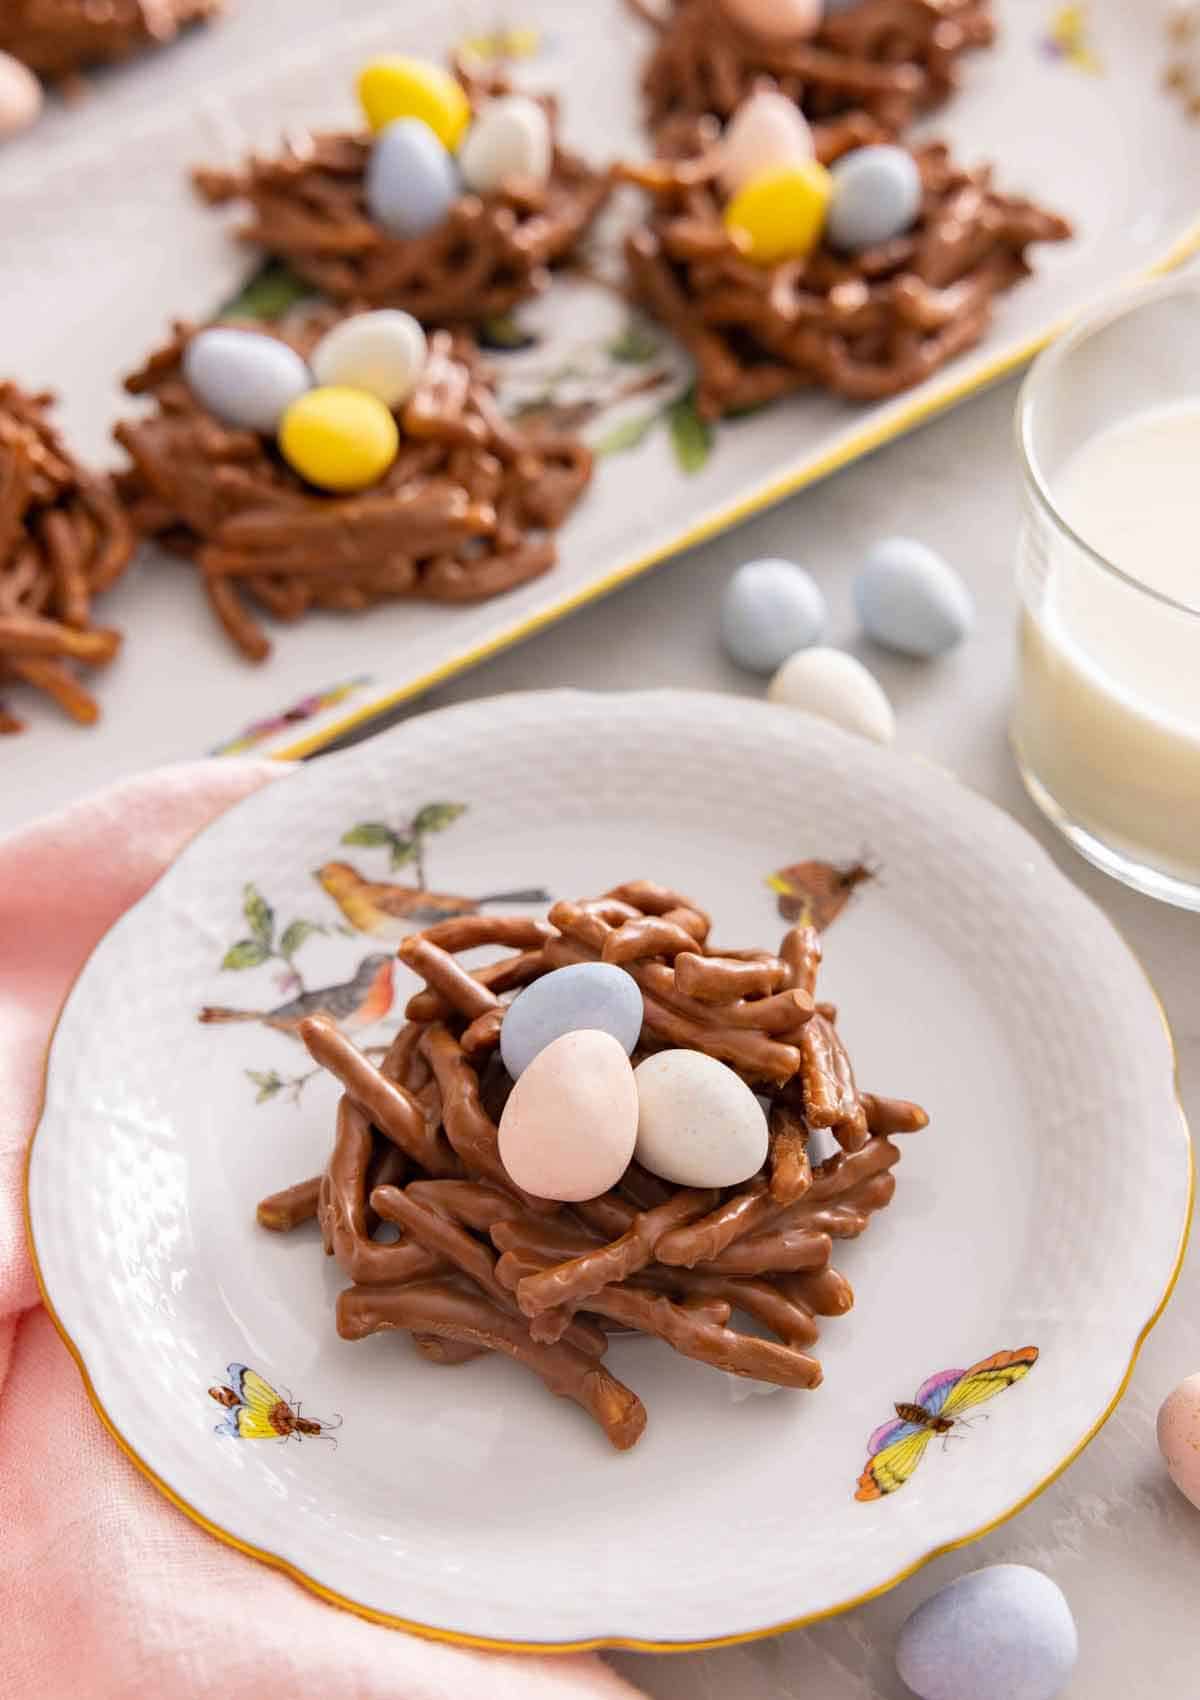 A plate with a birds nest cookie on it by a glass of milk.